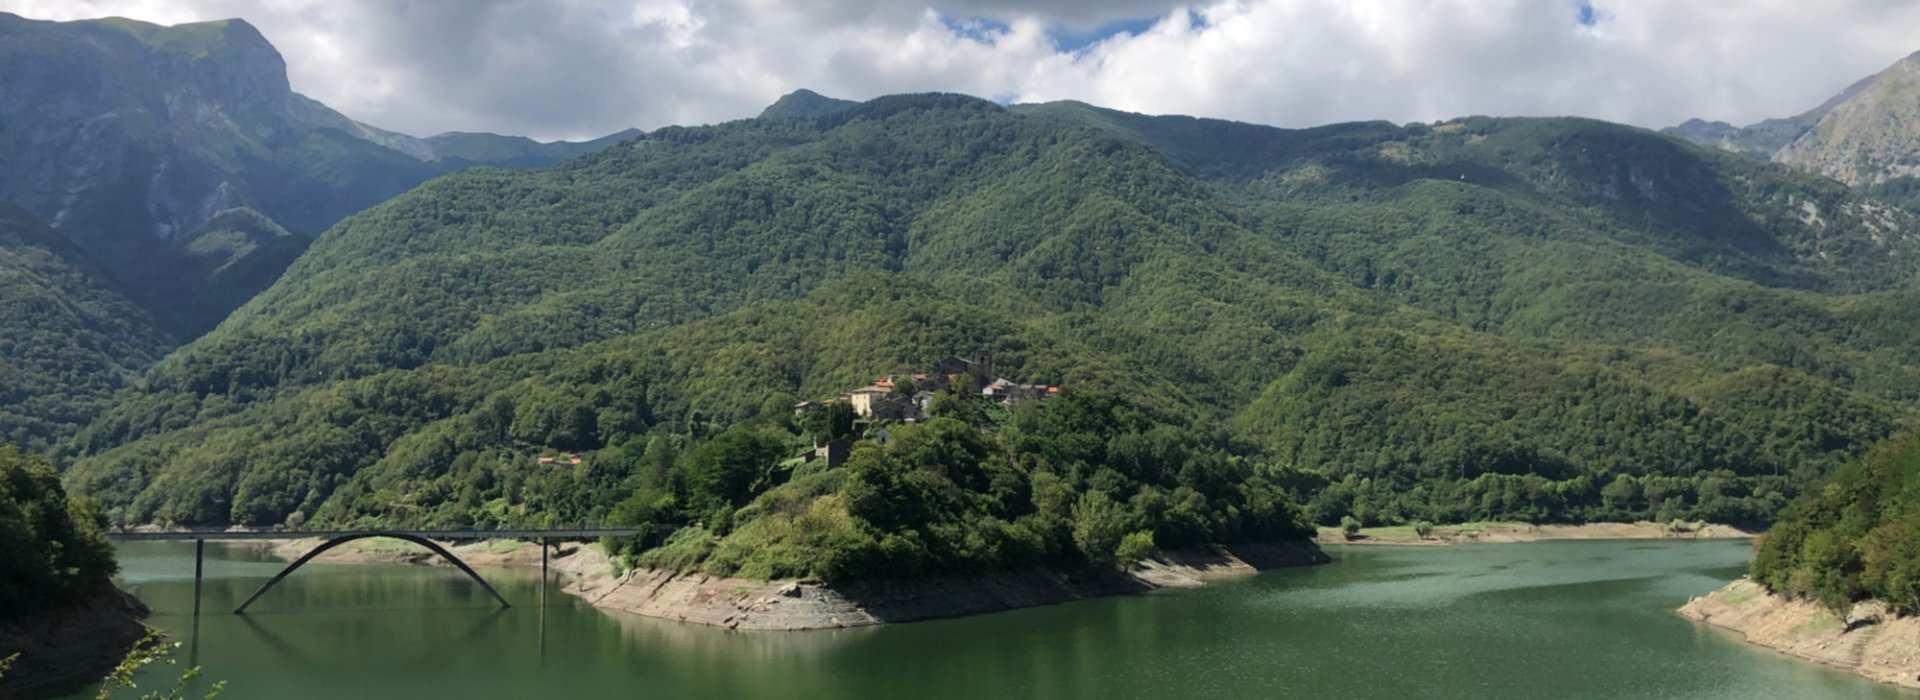 Six days immersed in the Garfagnana countryside Tuscany